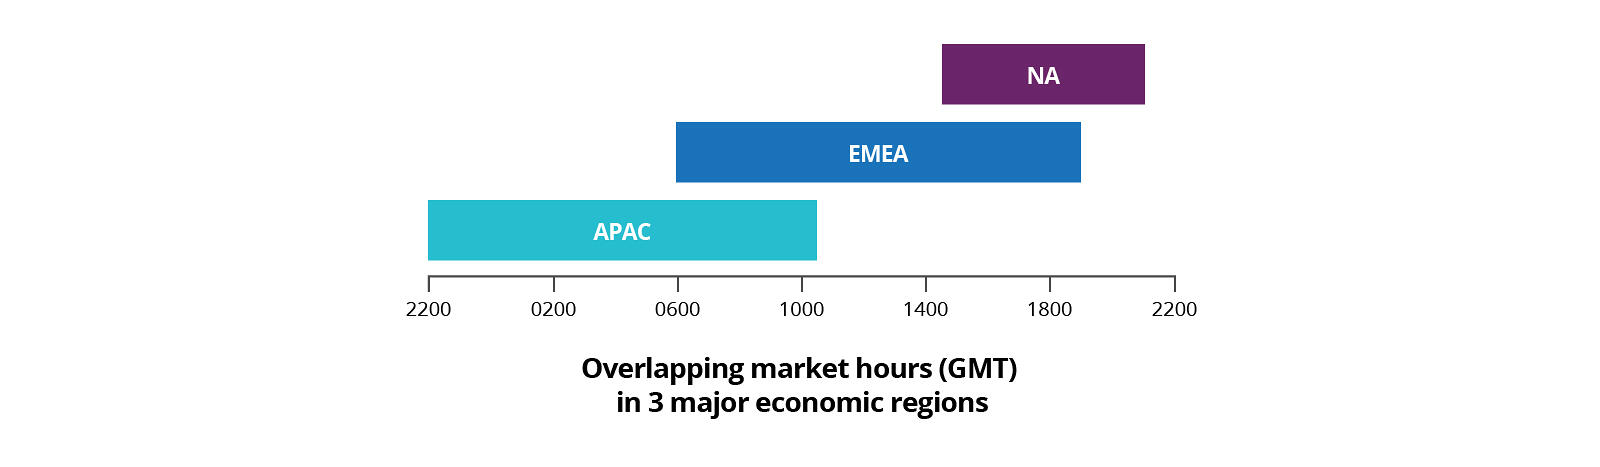 Overlapping market hours (GMT) in 3 major economic regions